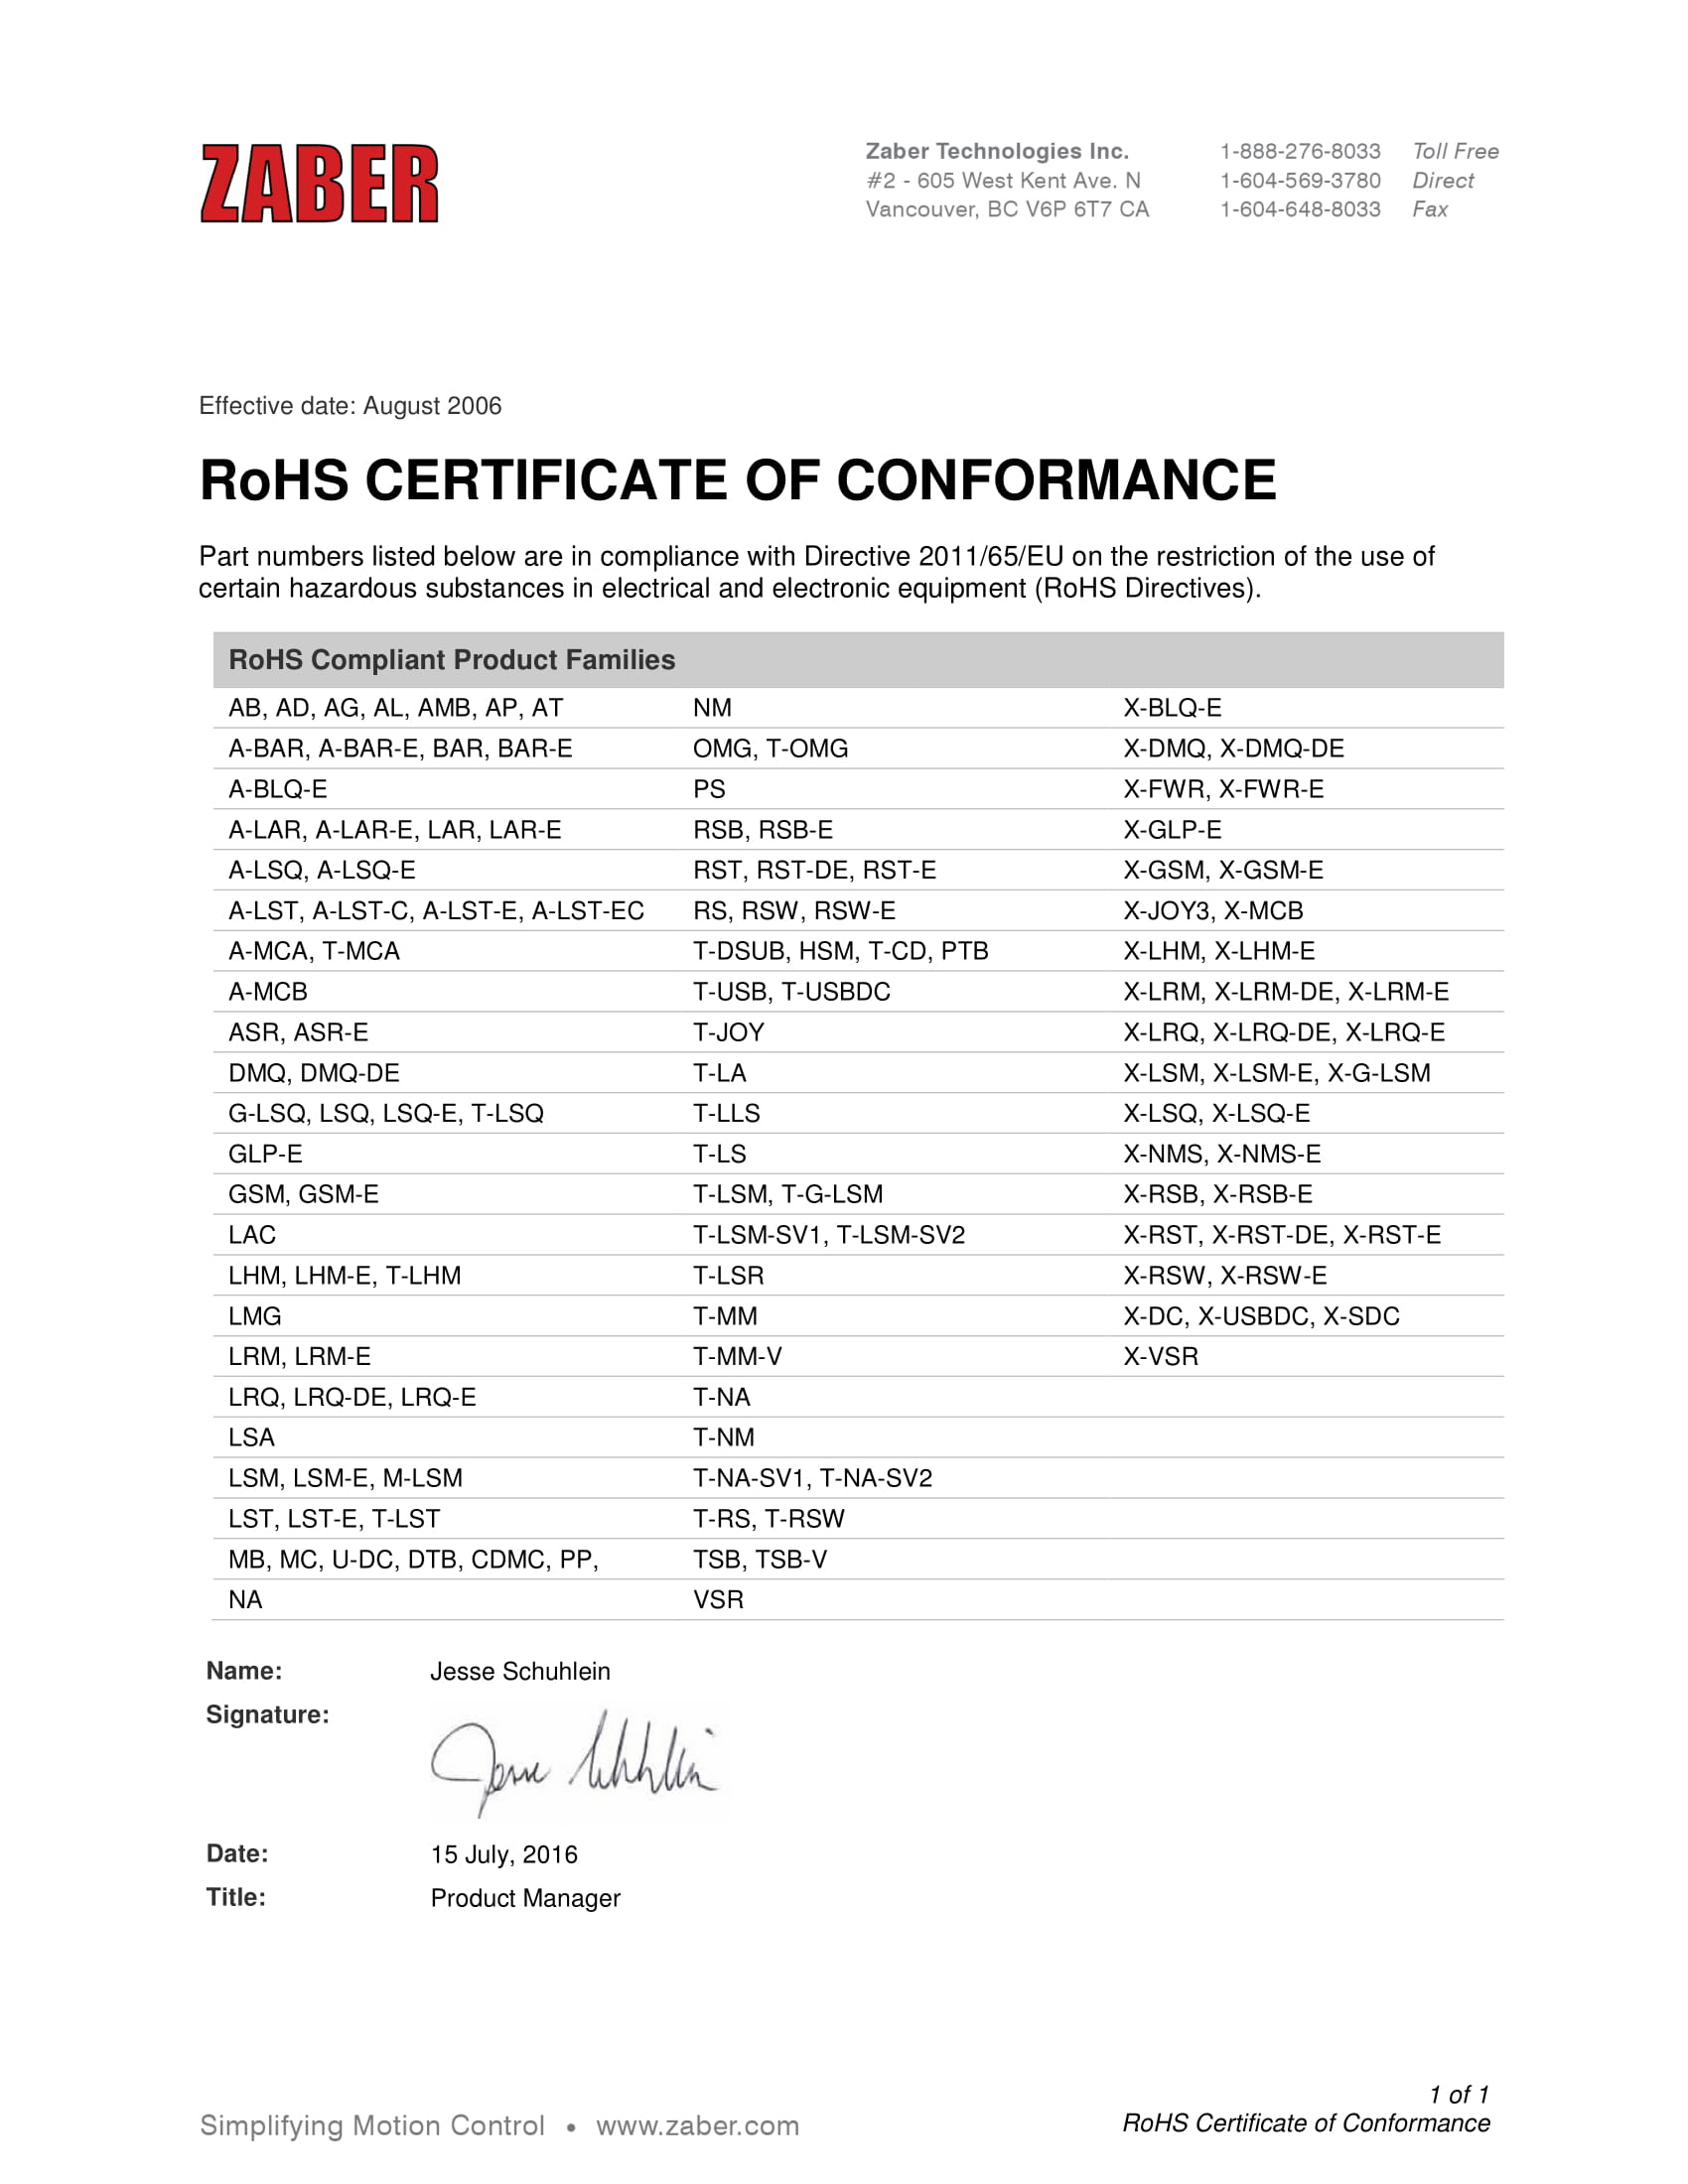 rohs certificate of conformance example